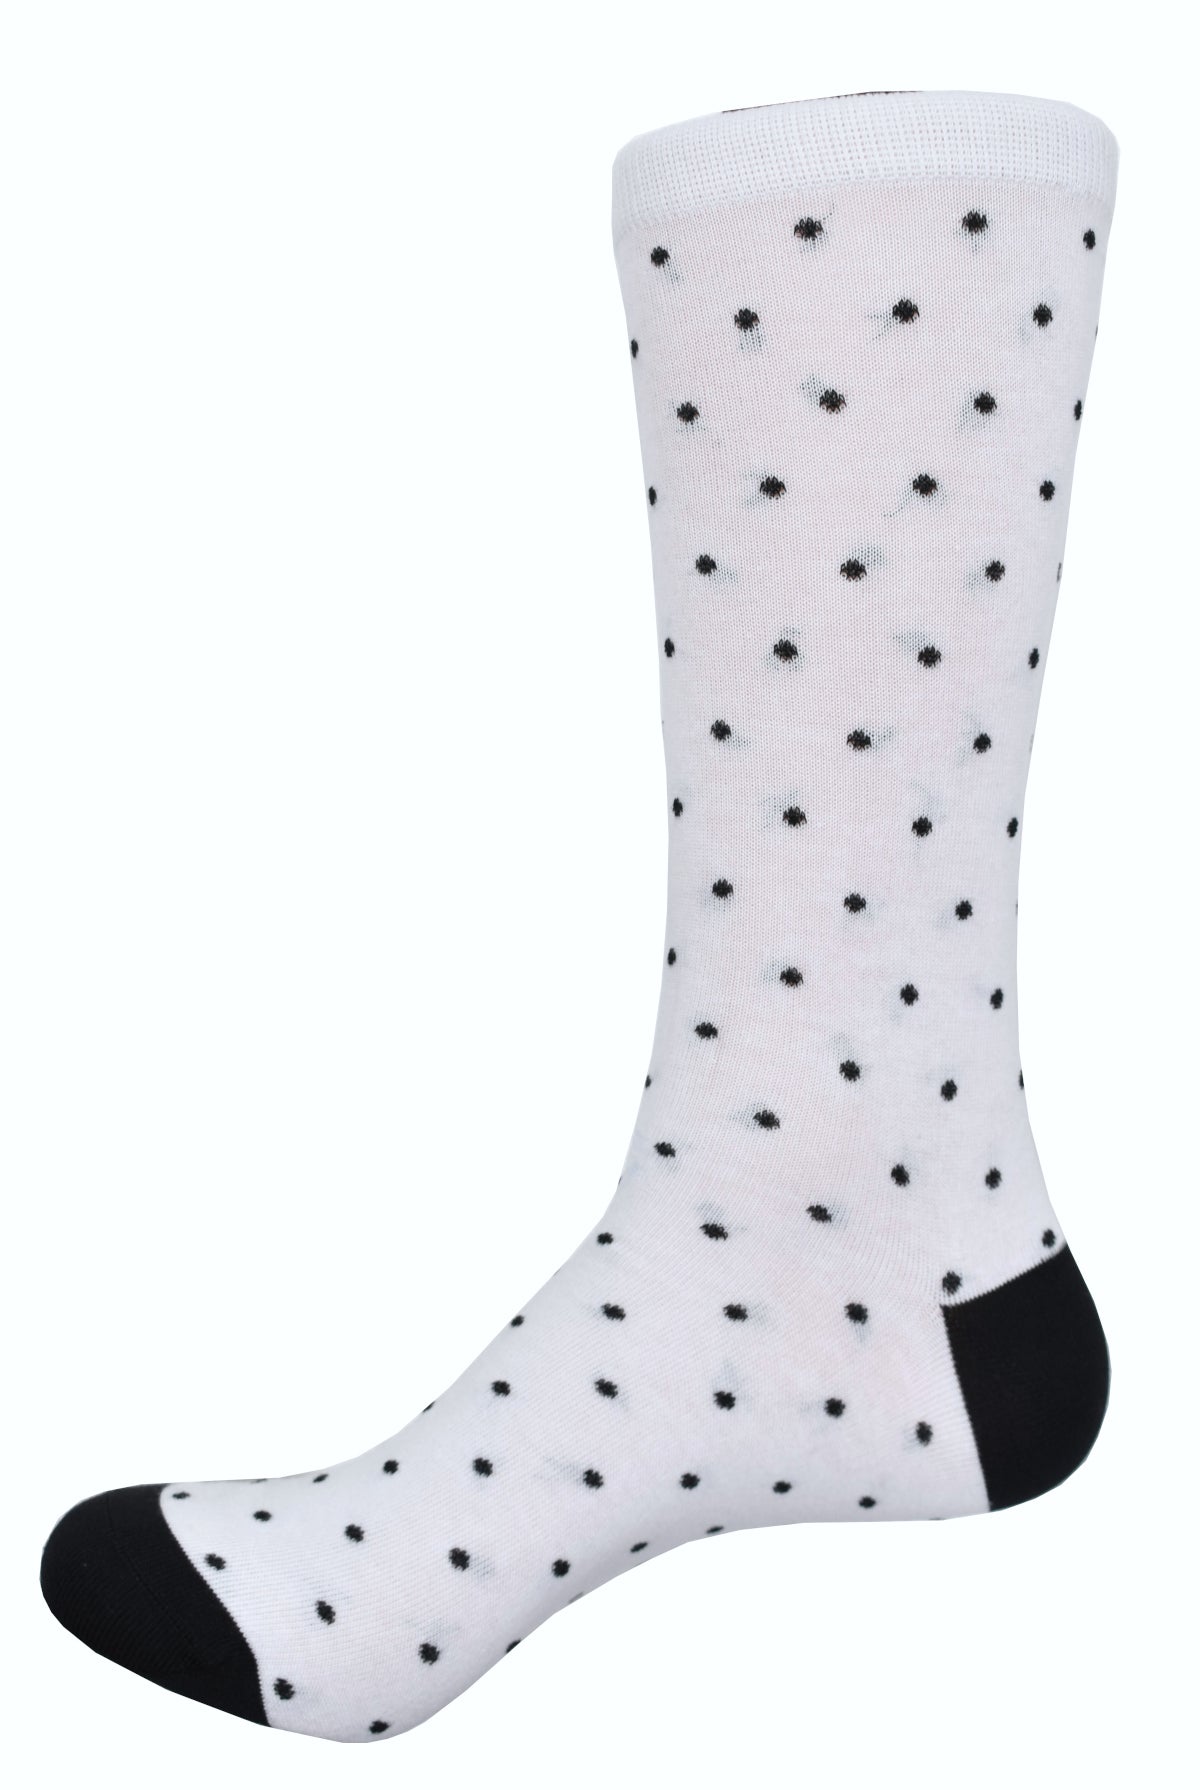 Upgrade your sock game with a Marcello White Sock with Black Dots! Made with 97% cotton and 3% lycra, this mercerized sock offers both comfort and style. The classic crisp white design with small black dots adds a touch of fashion to the traditional image. Elevate your wardrobe today!